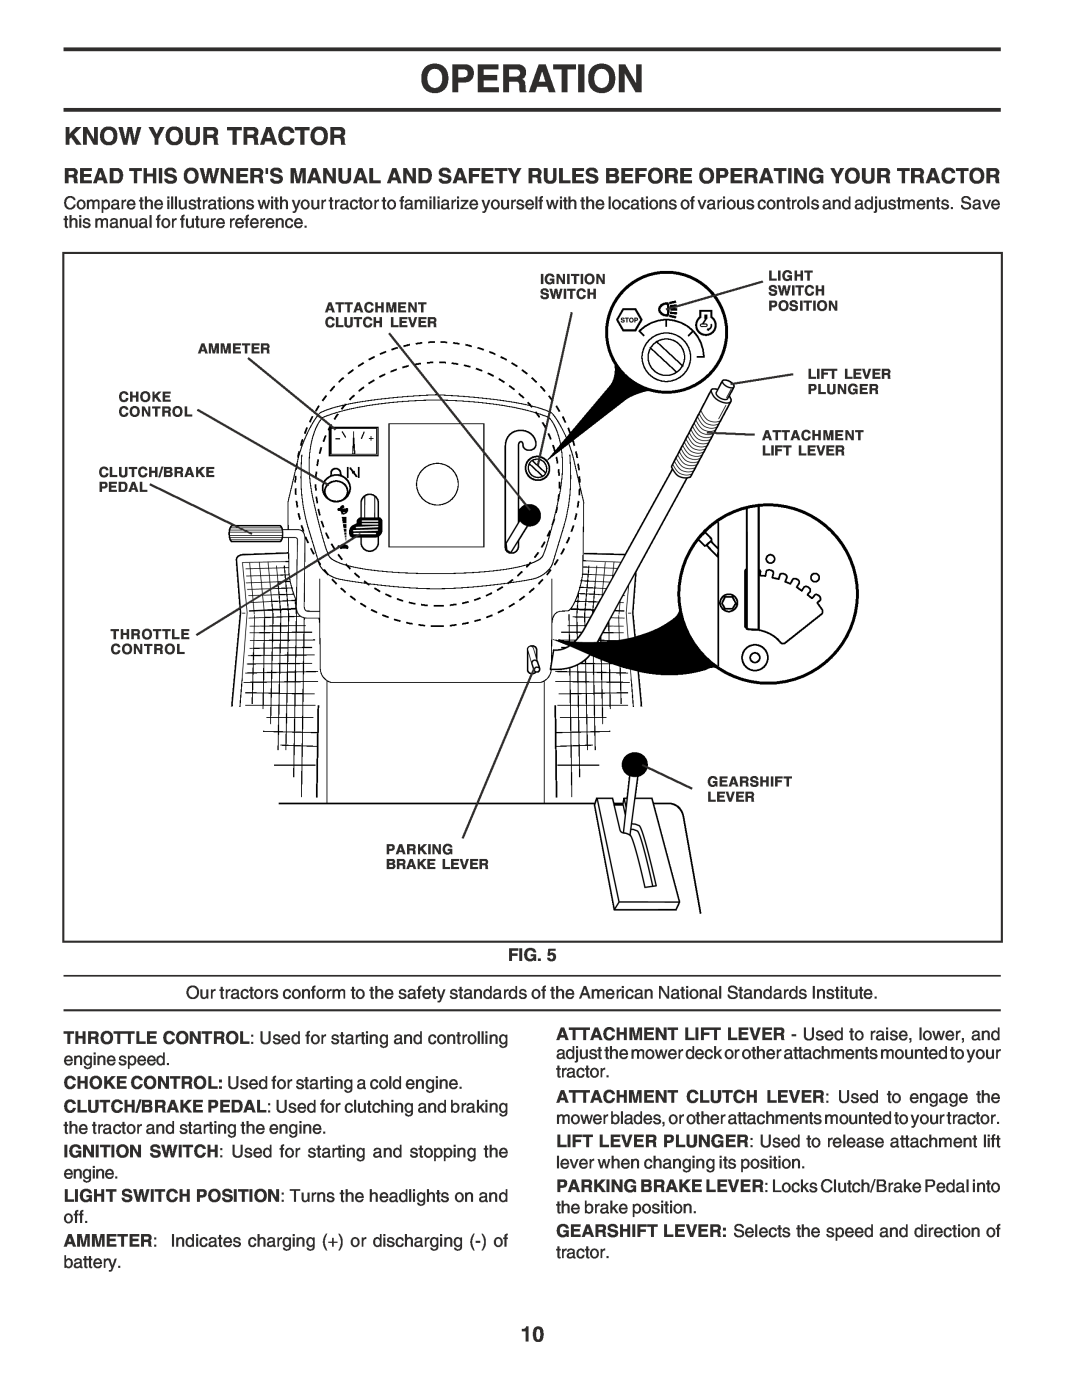 Poulan 183748 owner manual Know Your Tractor, Operation 